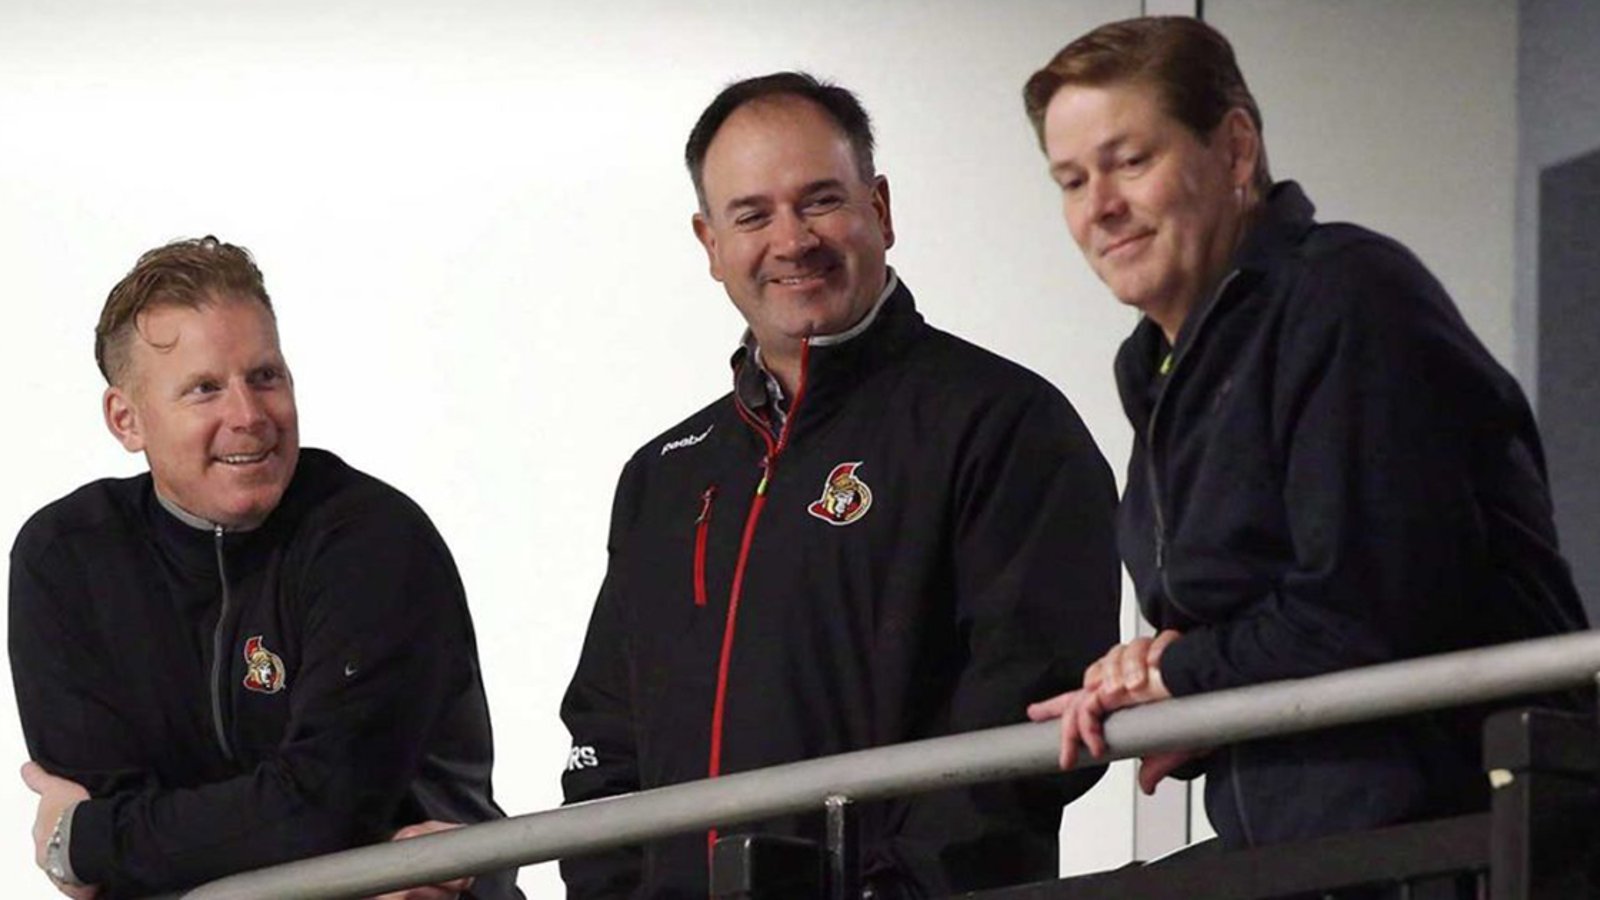 Breaking: Disgraced Sens assistant GM Lee pleads guilty to harassment charges